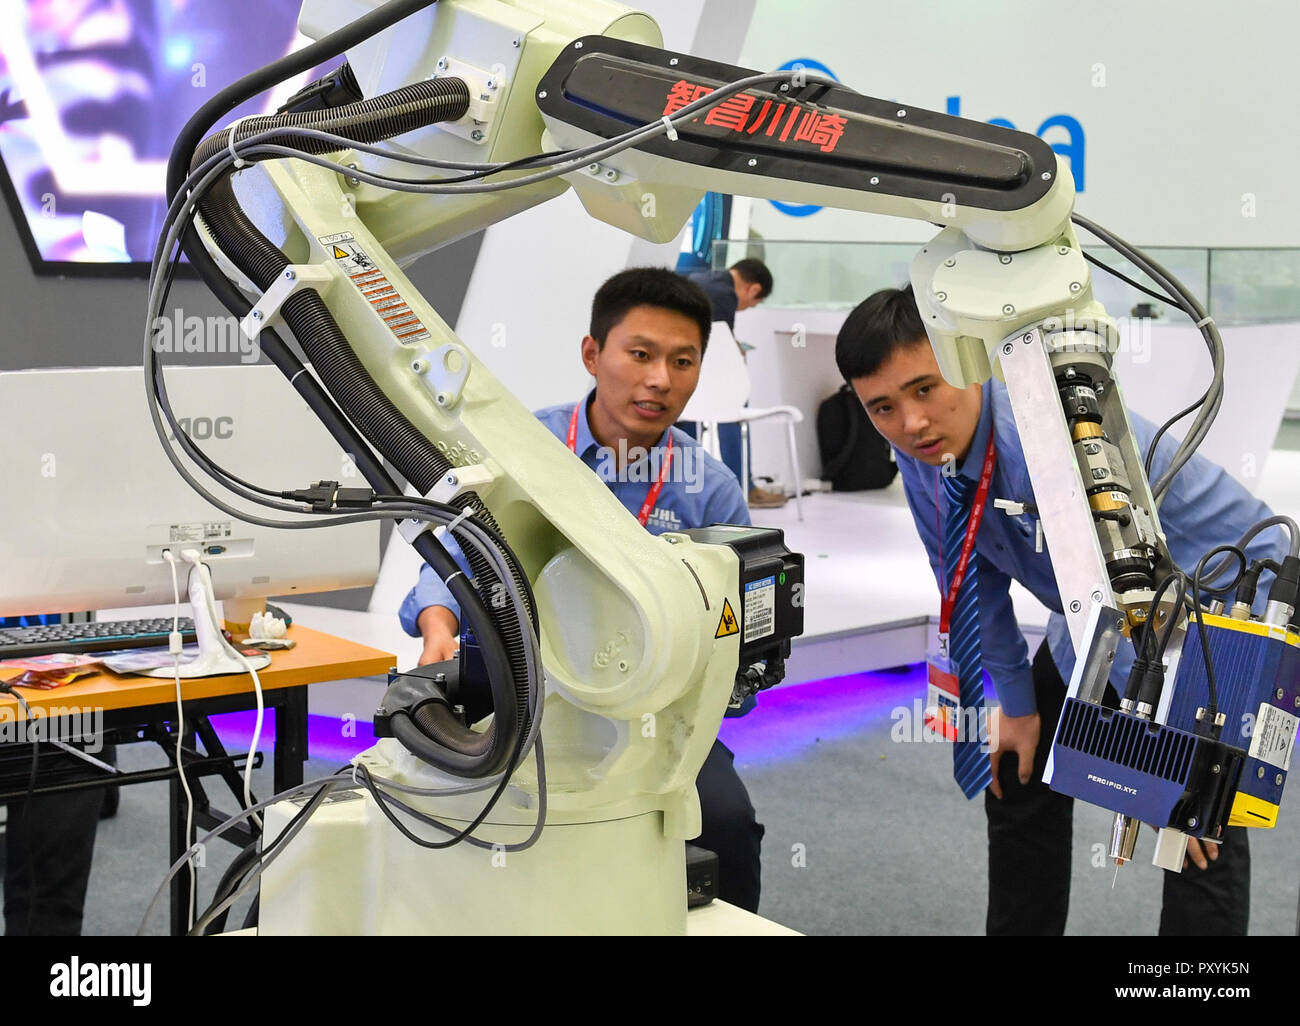 Shunde, China's Guangdong Province. 24th Oct, 2018. Exhibitors adjust precision welding robot during the Internet  Expo at Shunde District of Foshan, south China's Guangdong Province, Oct. 24, 2018. The 4th Internet  Expo kicked off here on Wednesday. This year's expo consists of six major parts, respectively 'Internet Plus' Frontier Technology, Digital Business, Digital Life, Innovation and Startups, Robotics and Intelligent Manufacturing and Robots. The expo brings together more than 650 companies from around the world. Credit: Chen Liqun/Xinhua/Alamy Live News Stock Photo